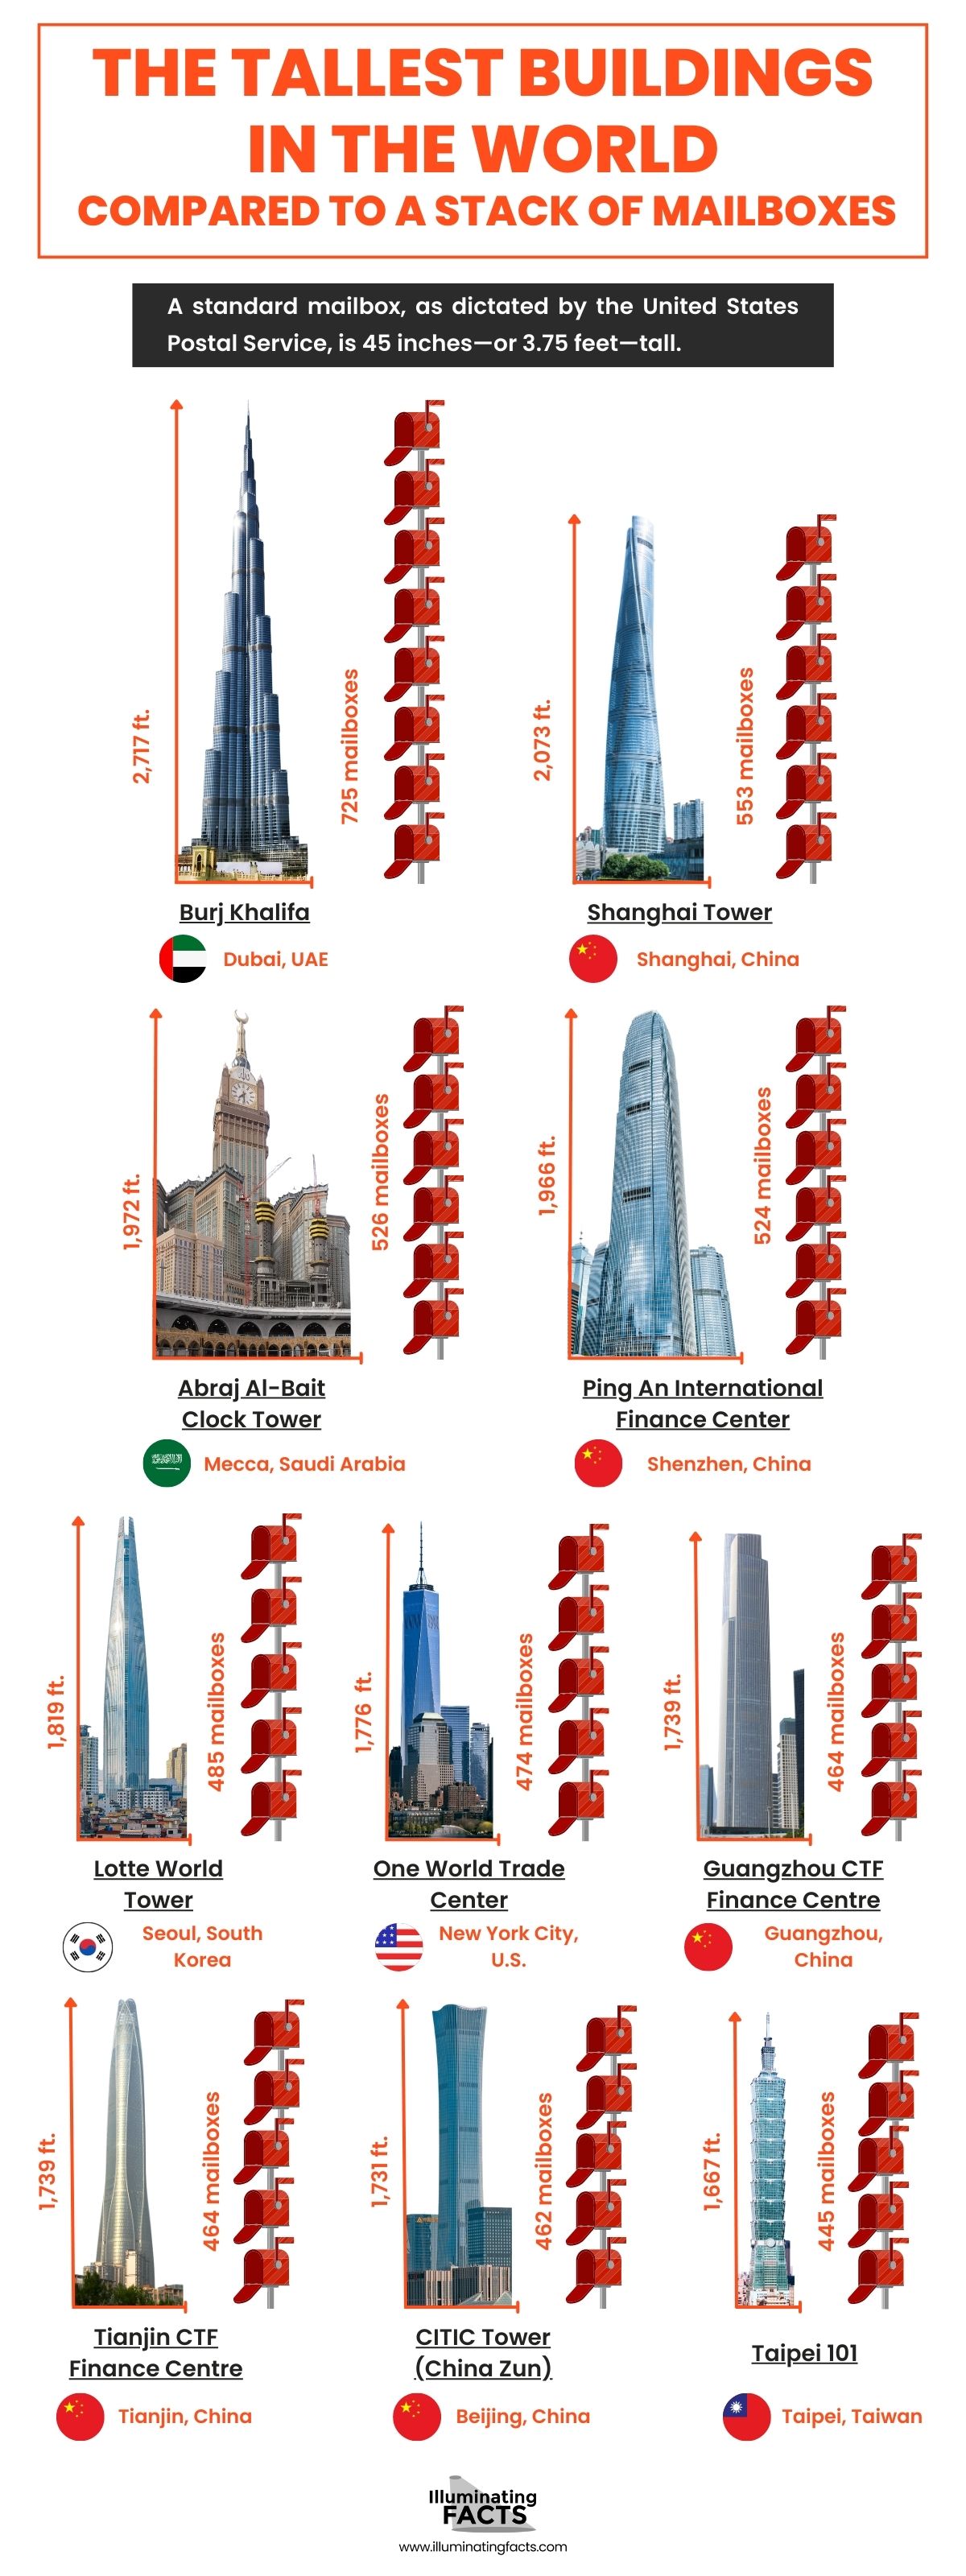 The Tallest Buildings in the World Compared to Mailboxes